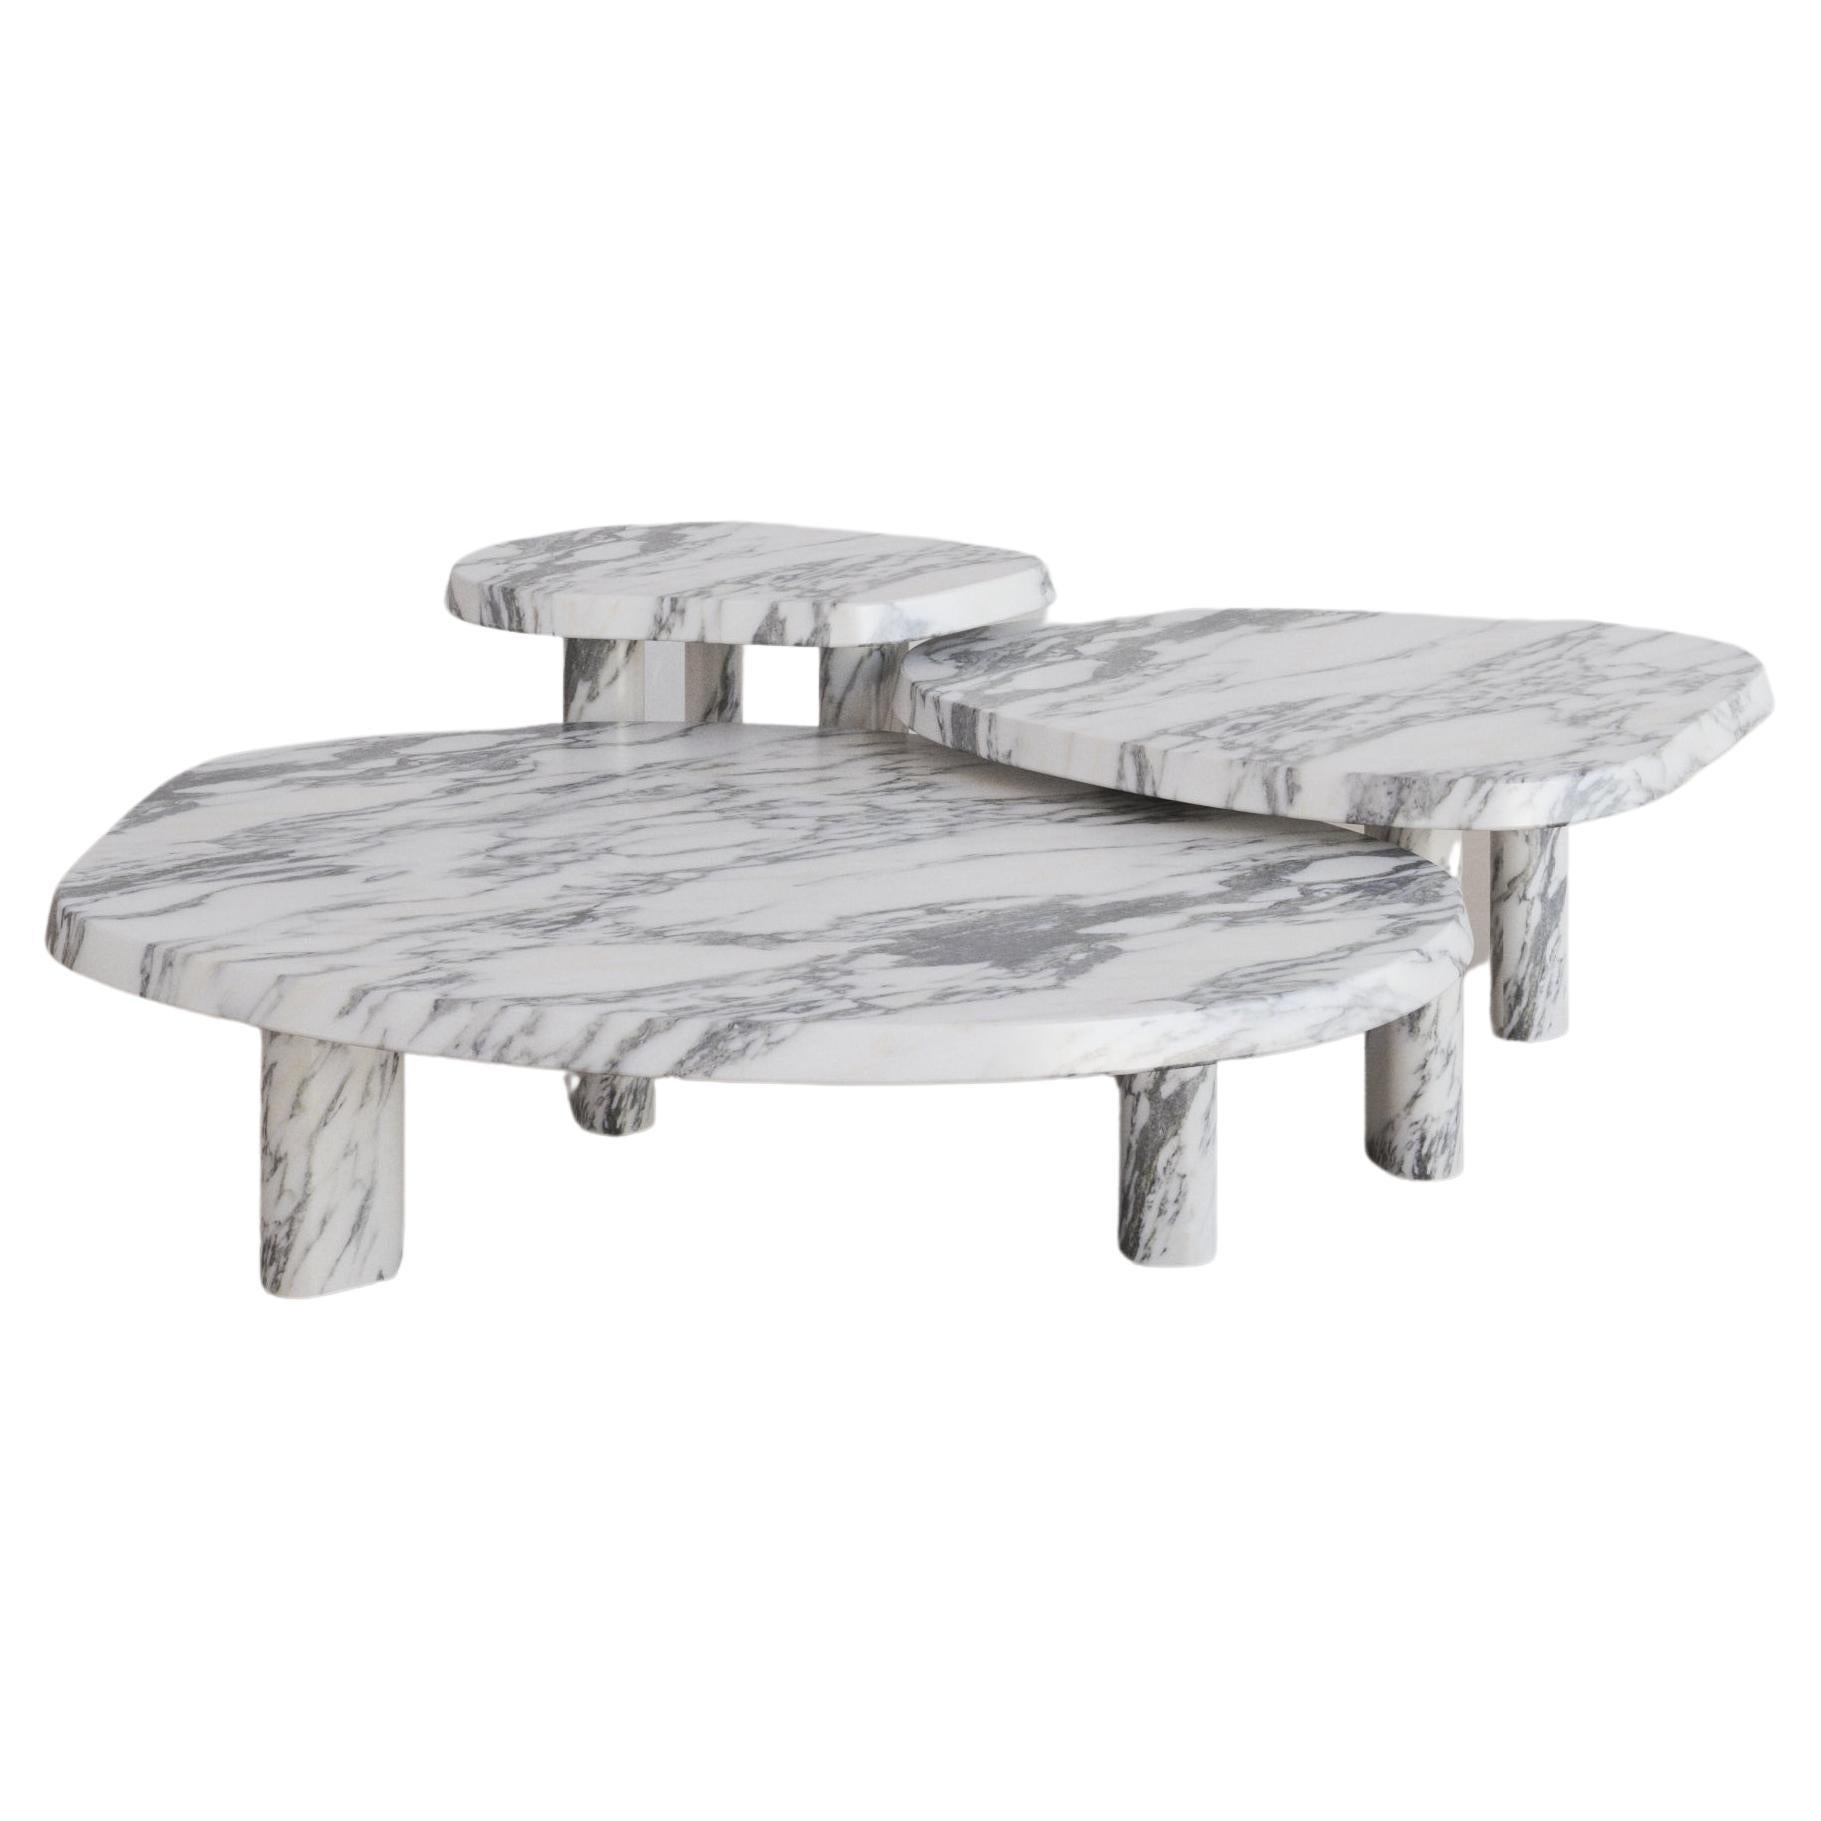 The Fiori Coffee Table in Viola Calacatta Marble by The Essentialist infers a delicate sense of organicism, a vision of sublime is born, revolutionising beauty and deifying stone in its truest expression. Fiori forges a perpetual statement of